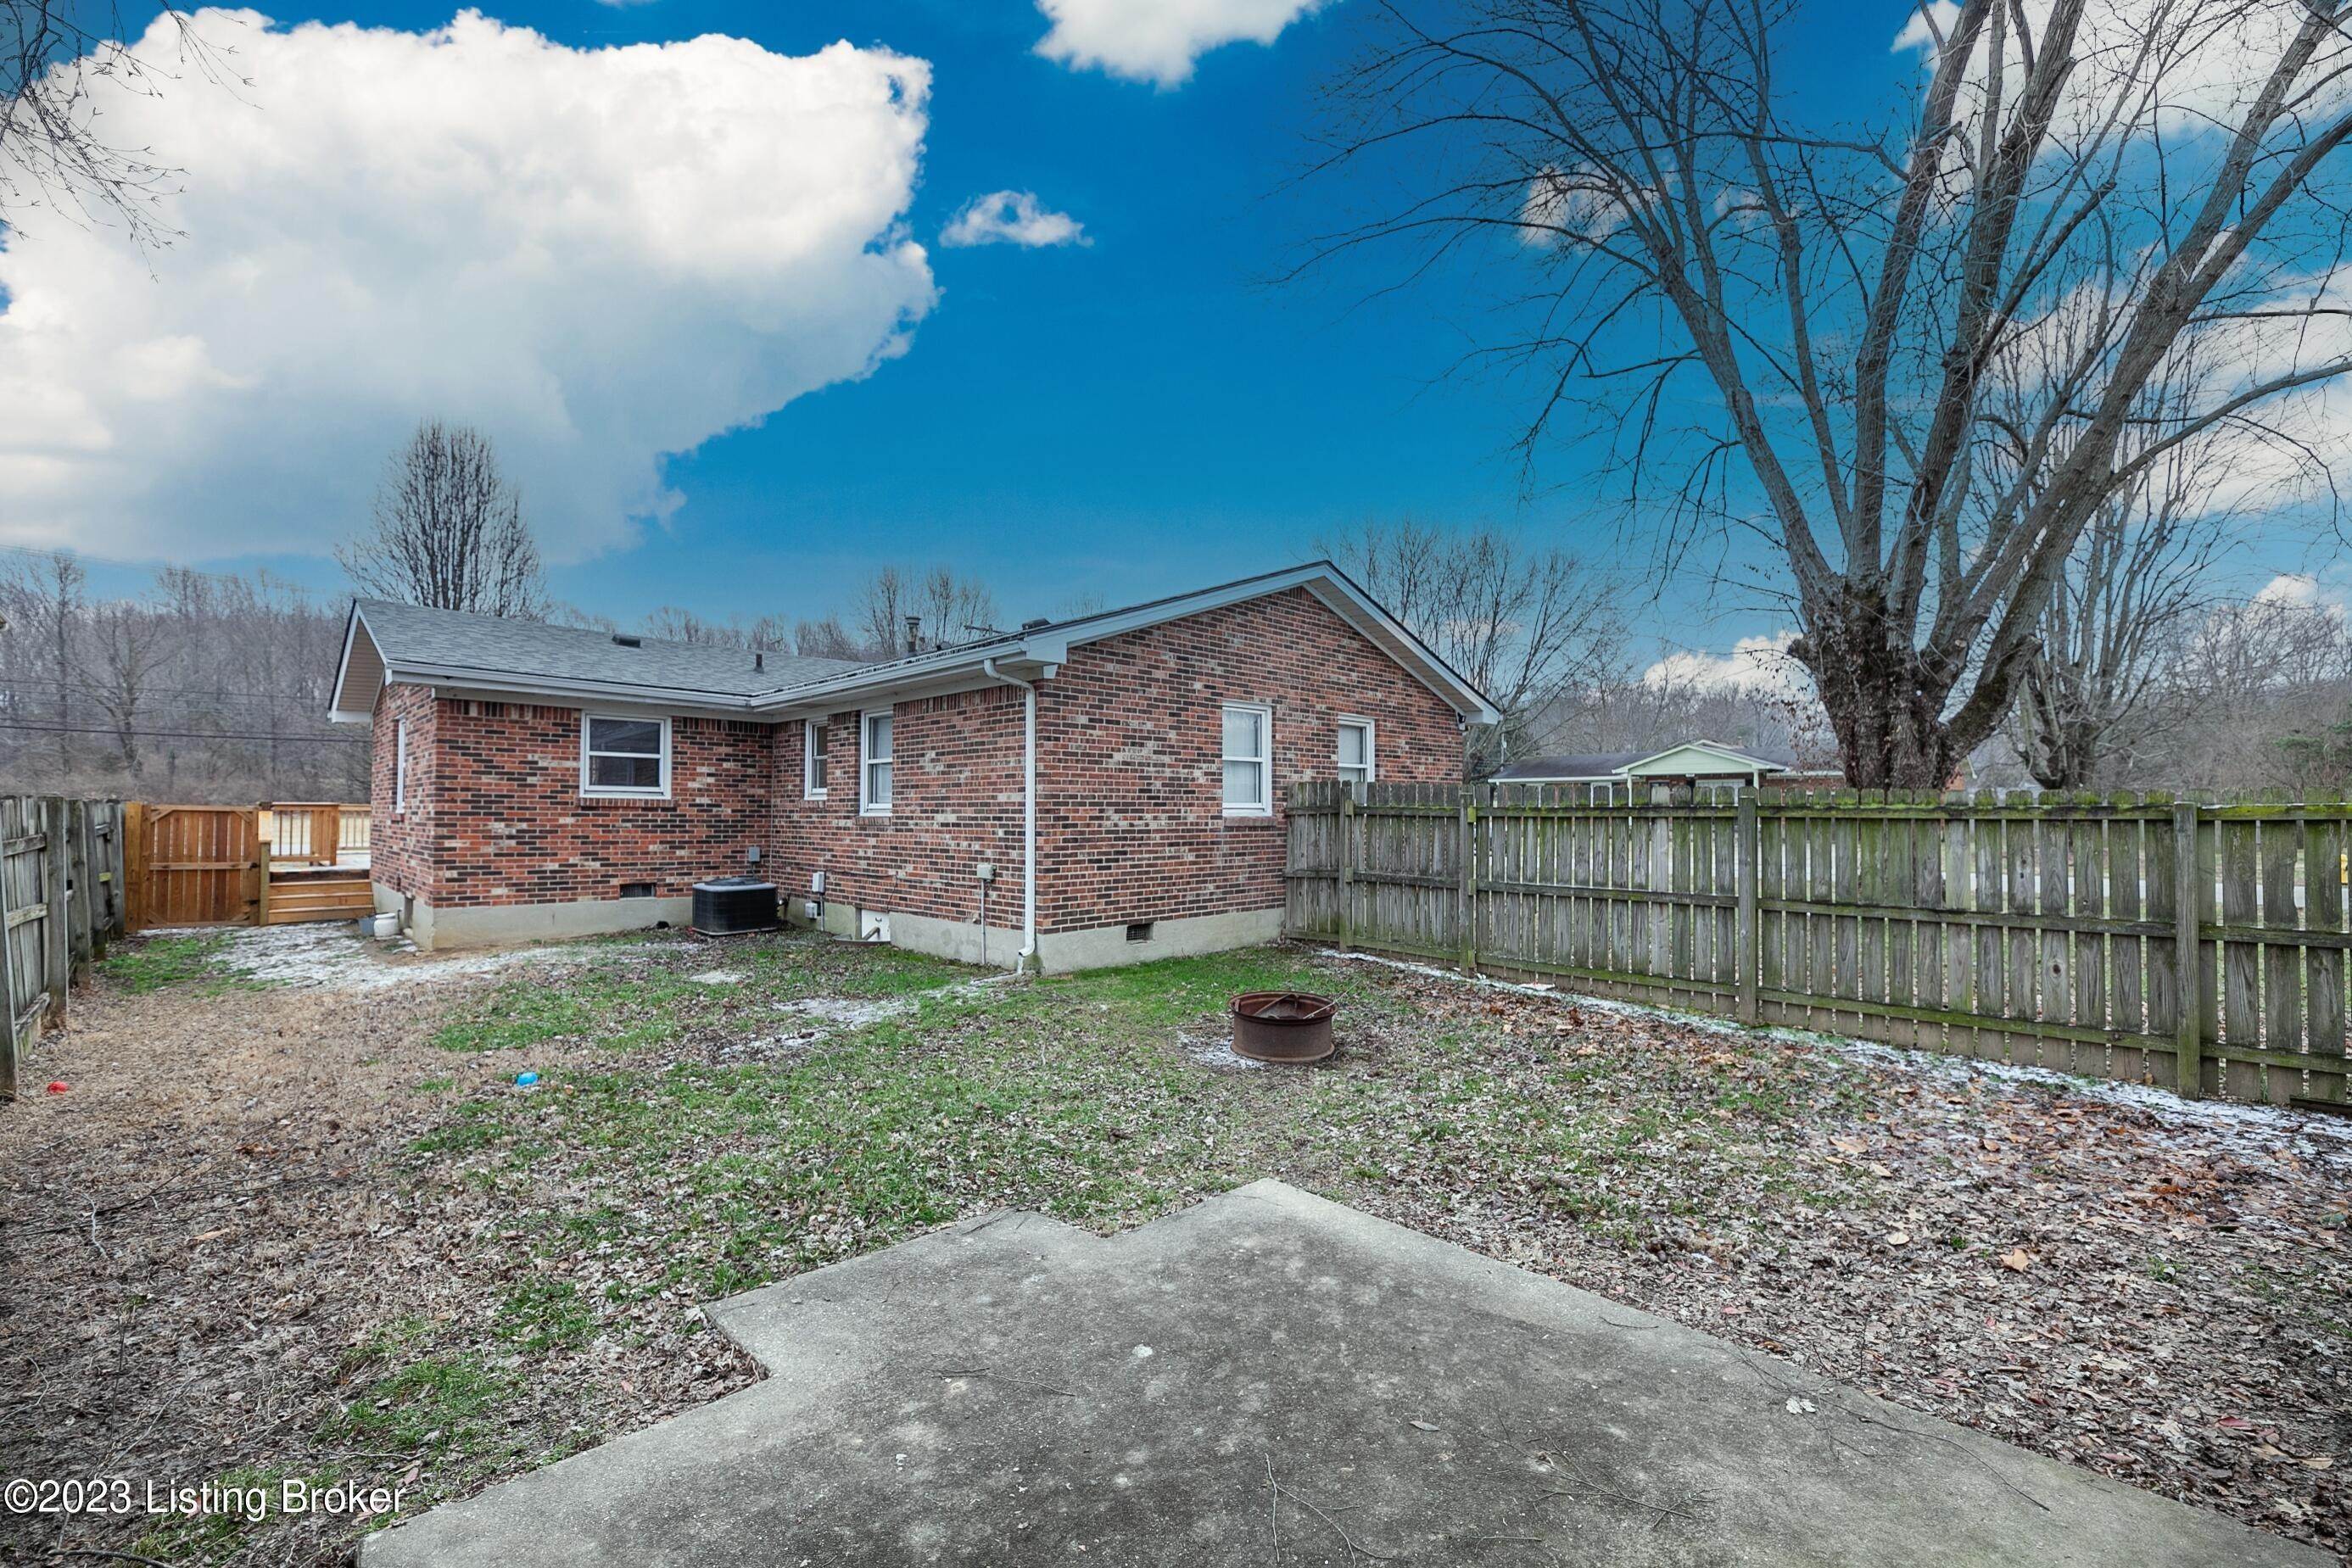 25. Single Family at Louisville, KY 40214